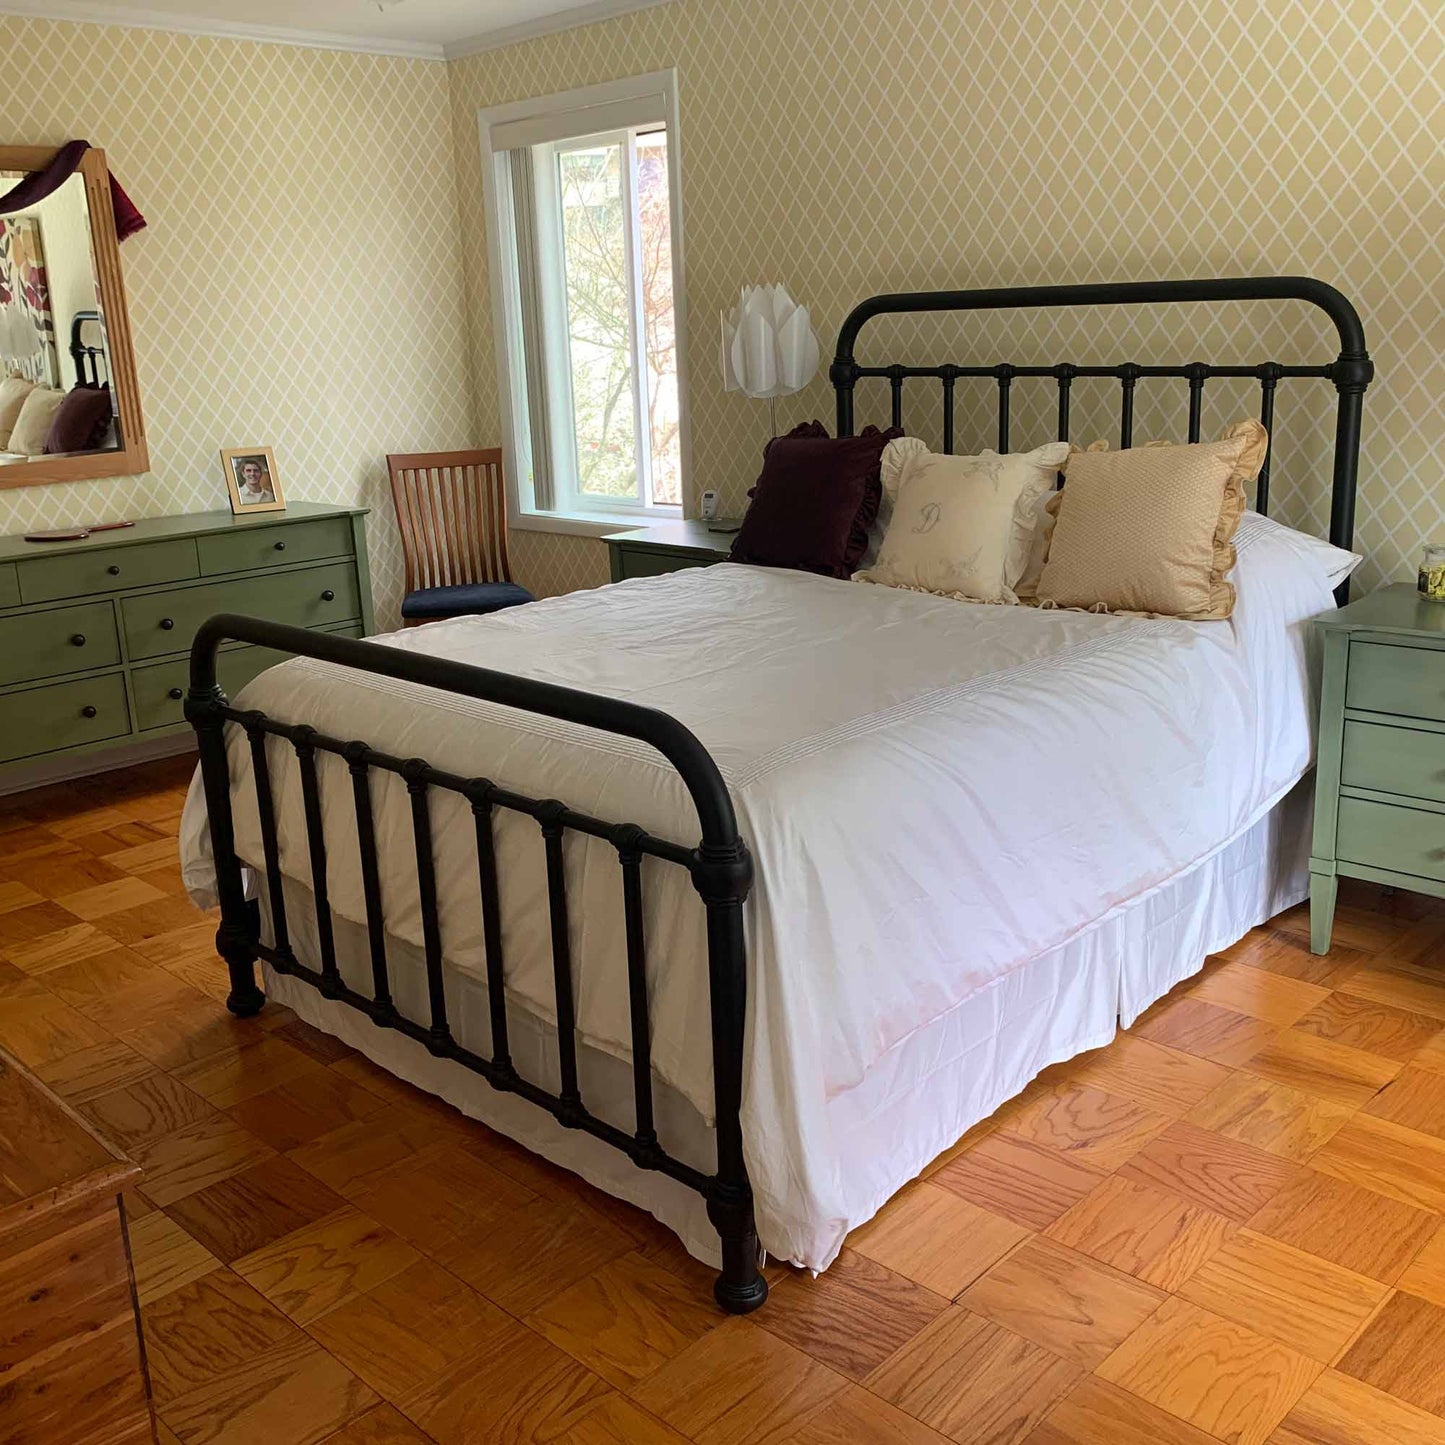 Heiressy's 20th c. Americana Iron Bed in Queen Size with a Matte Black finish.